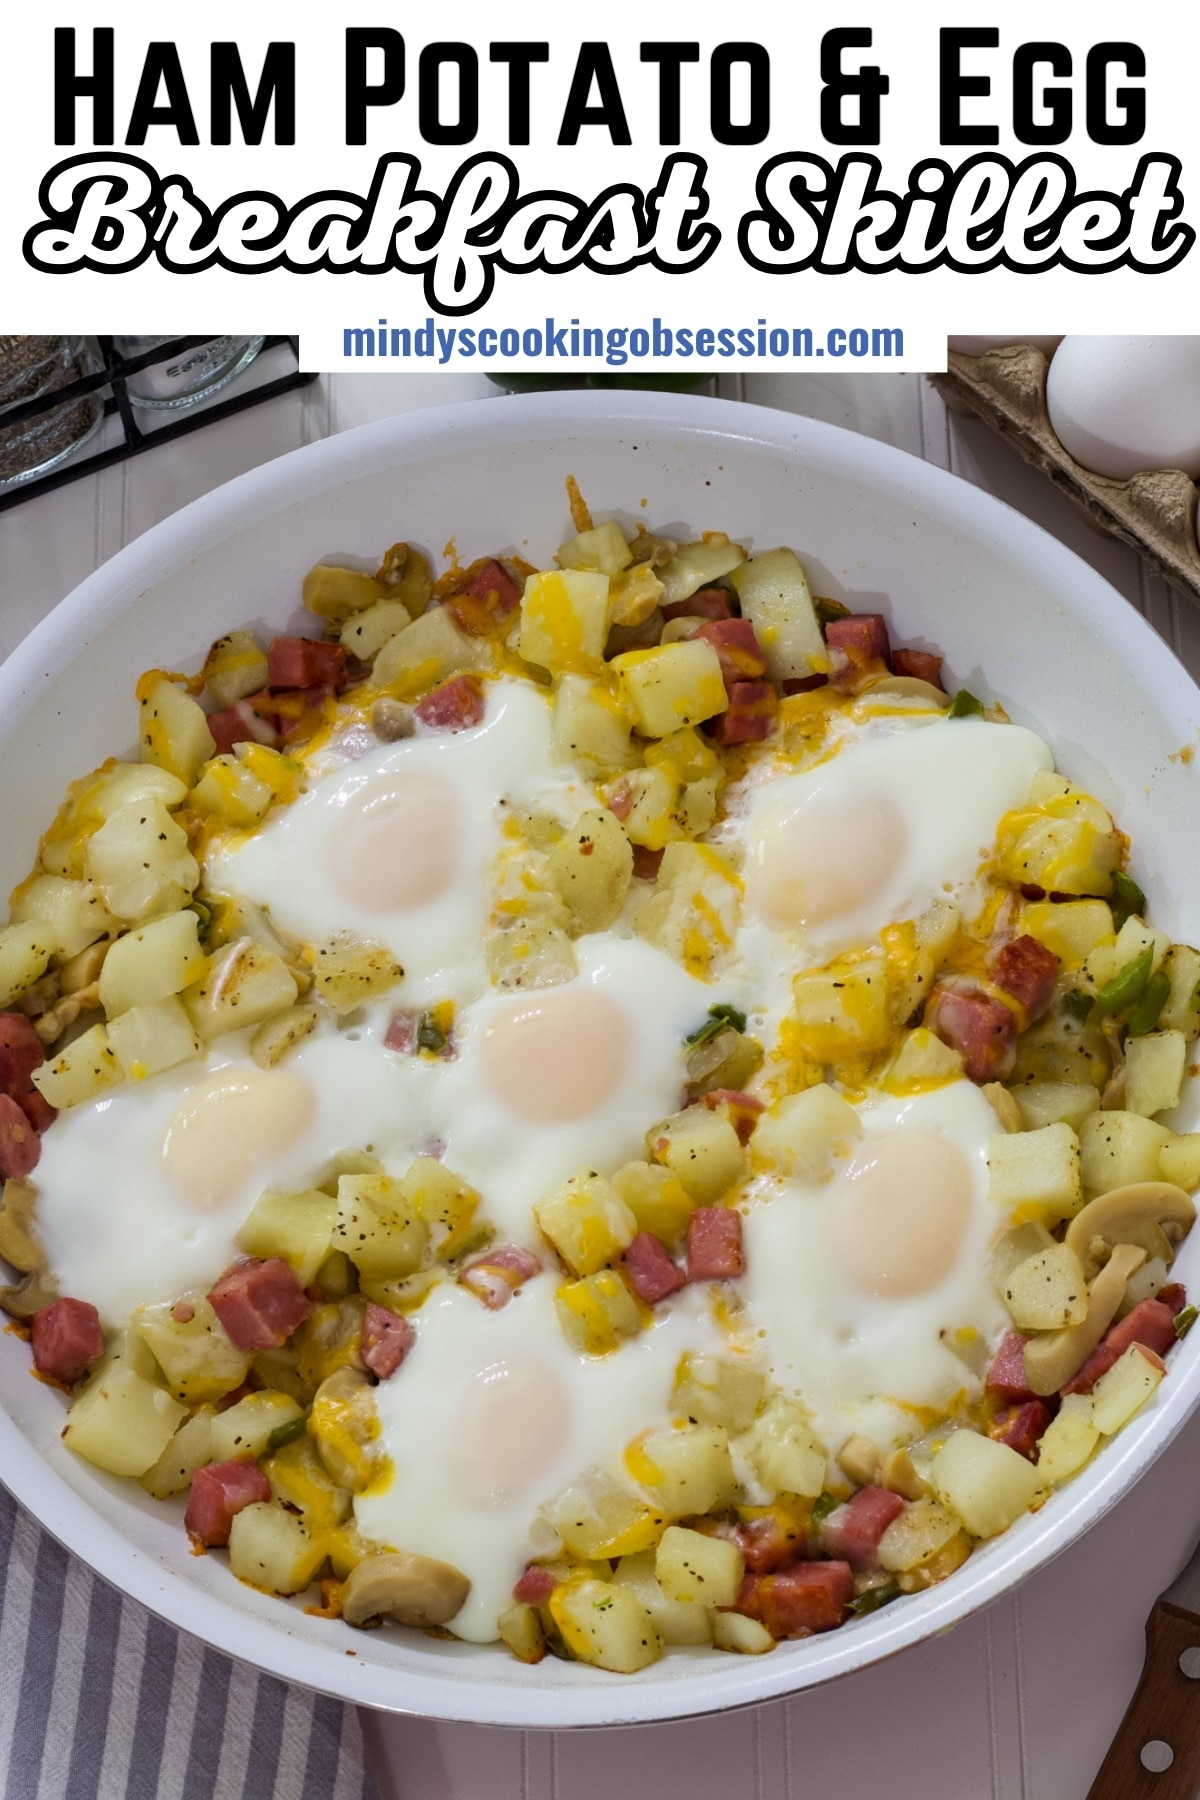 Craving a hearty breakfast? Try this easy one-pan recipe for a delicious skillet with eggs, ham, and potatoes. Perfect for a satisfying start to the day. via @mindyscookingobsession